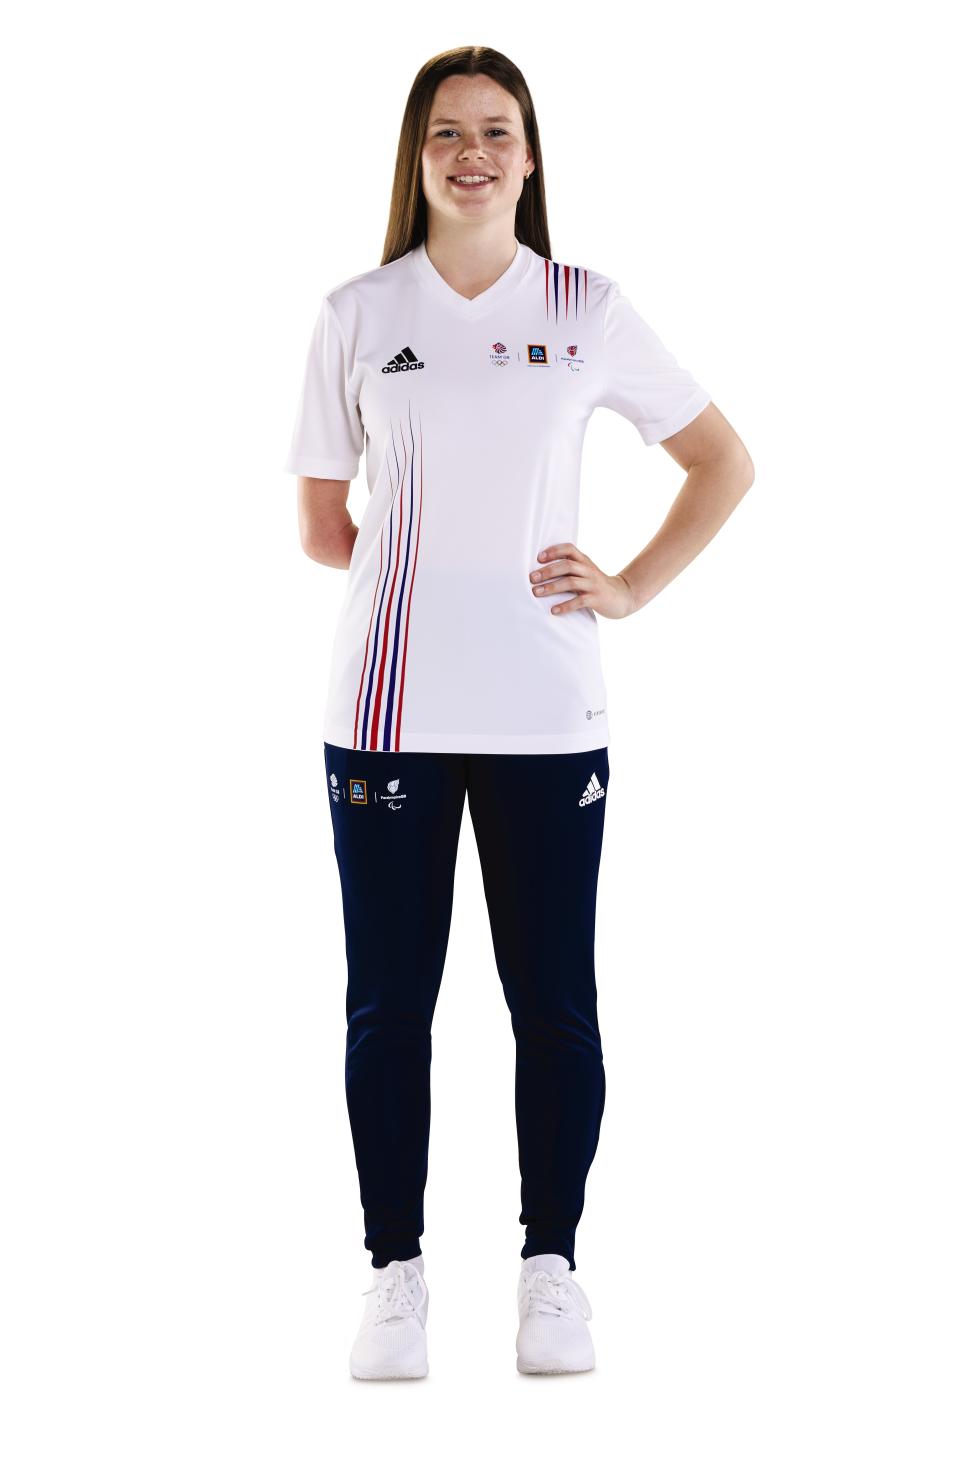 Rebecca Scott is supported by SportsAid and Aldi